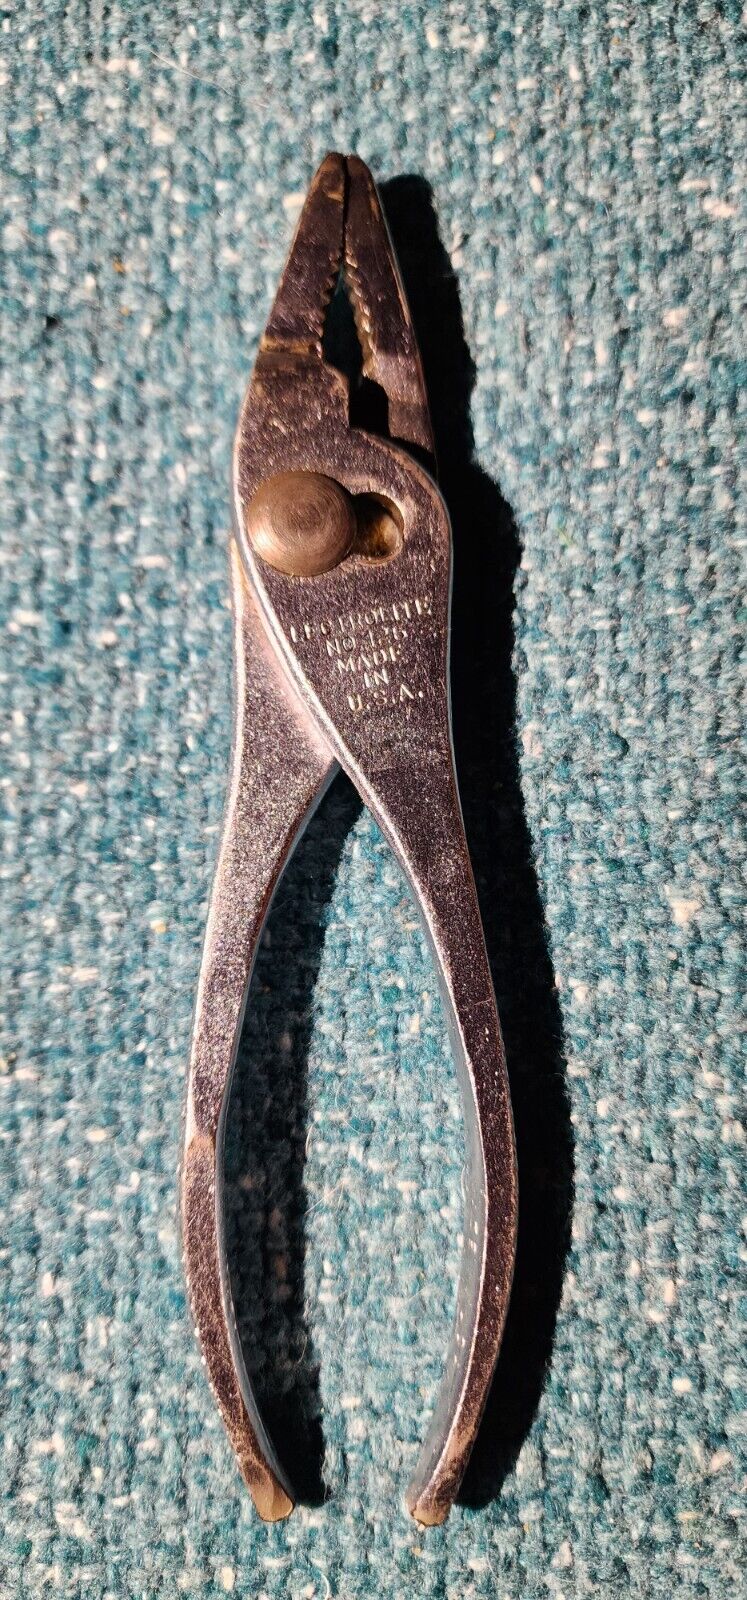 Vtg. 6½” LECTROLITE Slip Joint Pliers, No. 126, Made in USA Knurled handles